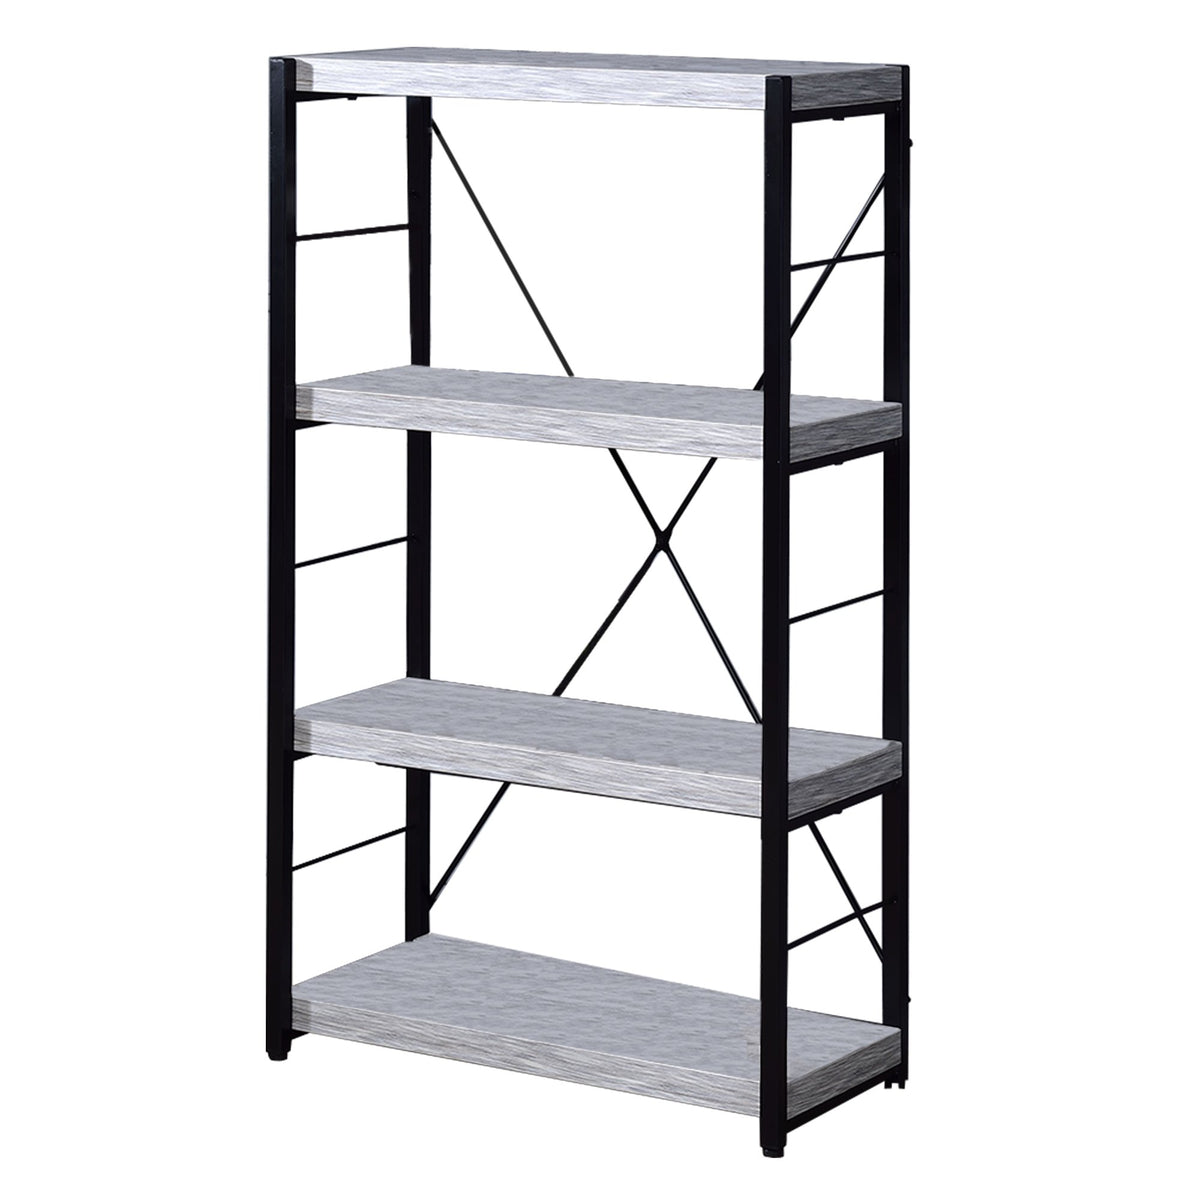 Industrial Bookshelf with 4 Shelves and Open Metal Frame, White and Black - BM209632